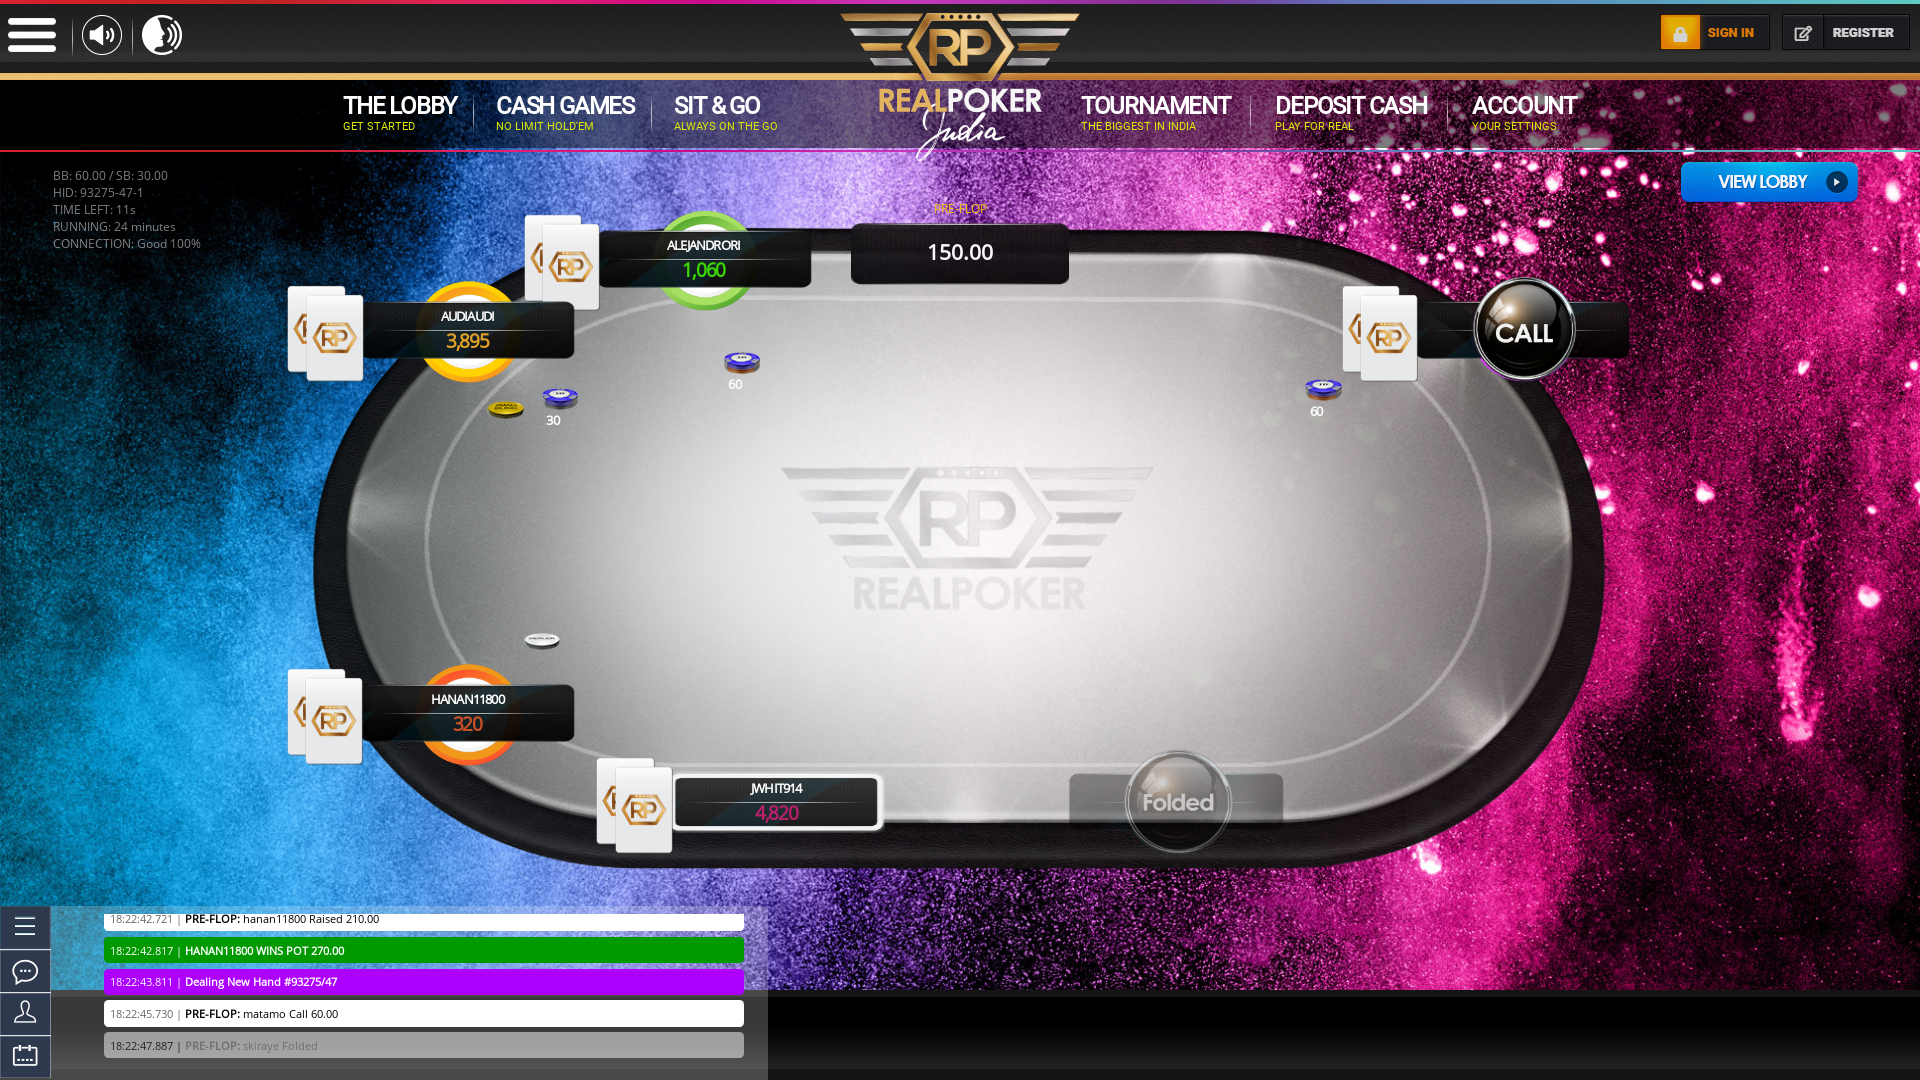 10 player texas holdem table at real poker with the table id 93275